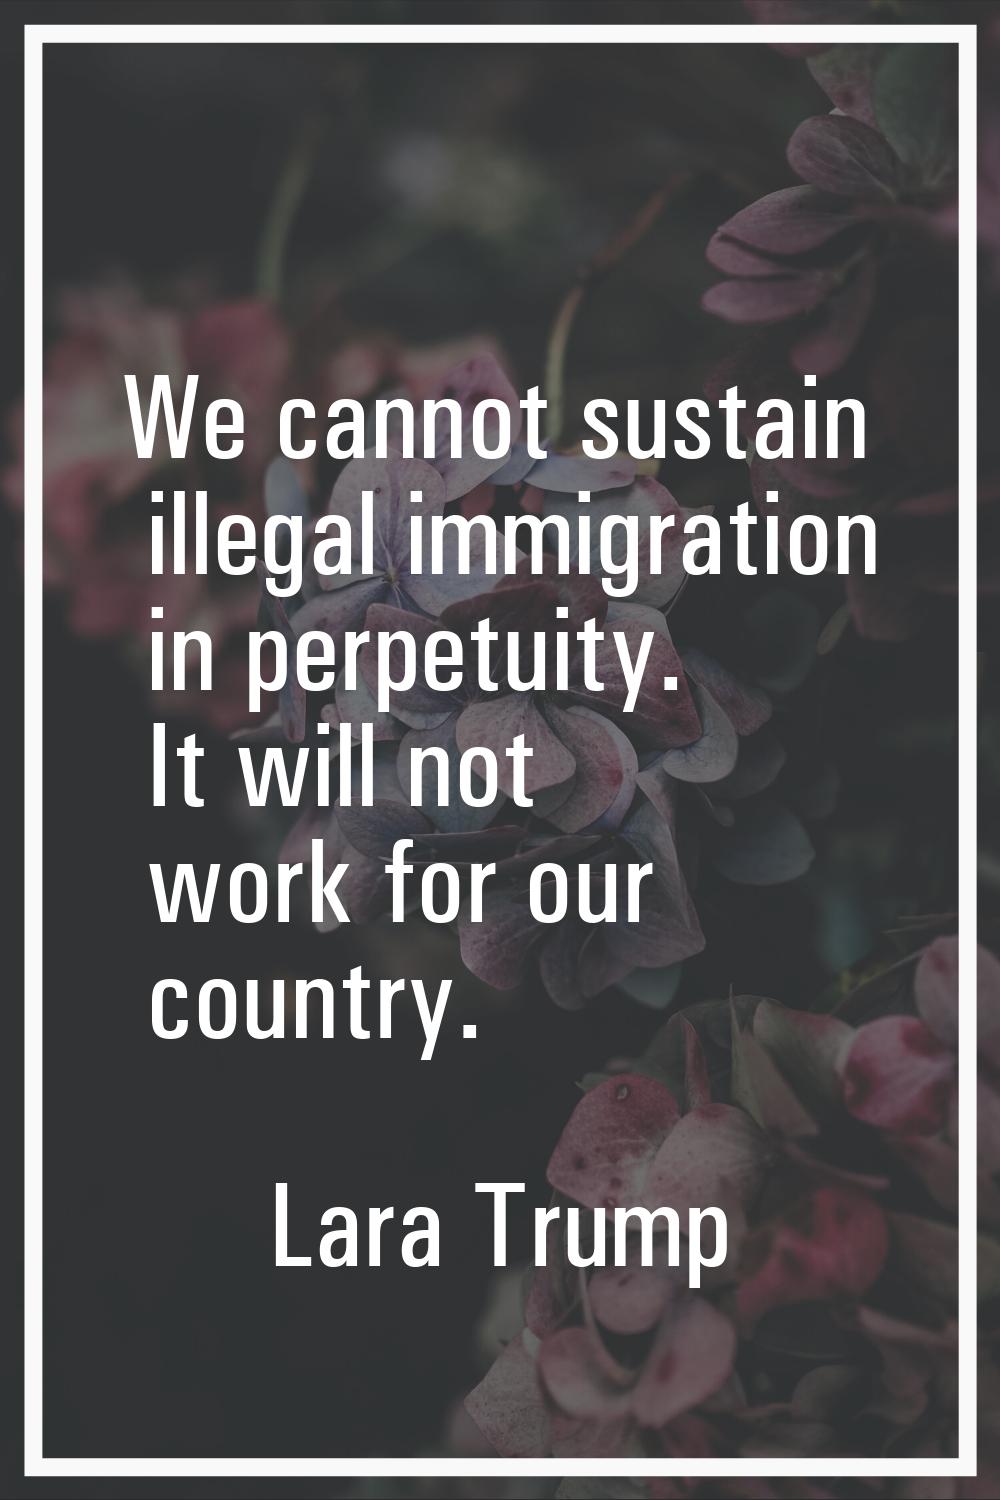 We cannot sustain illegal immigration in perpetuity. It will not work for our country.